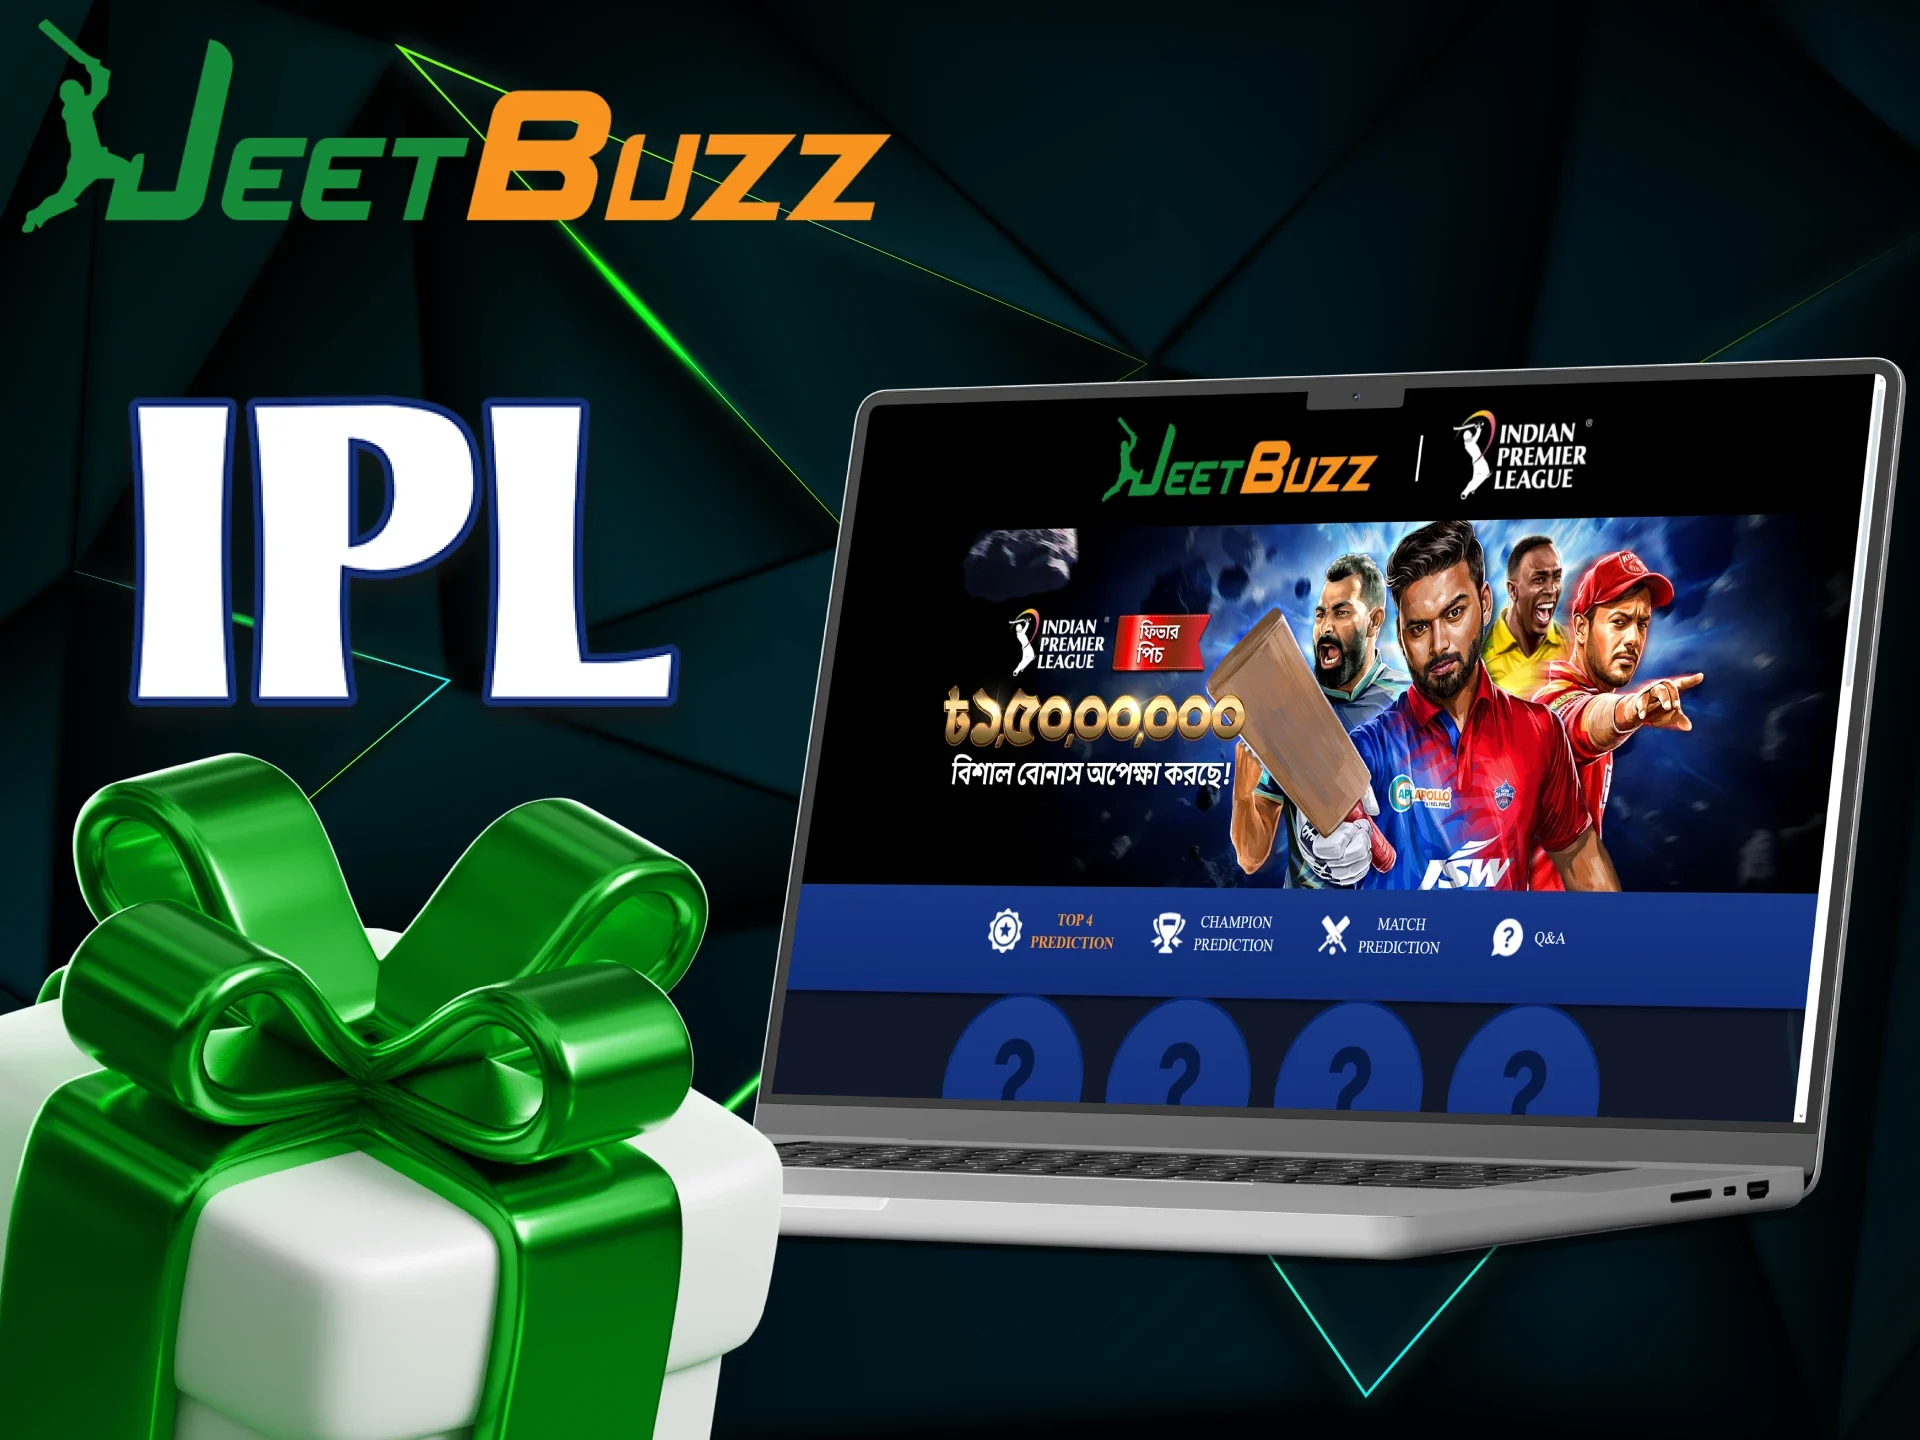 New JeetBuzz players receive a welcome bonus for sports betting.